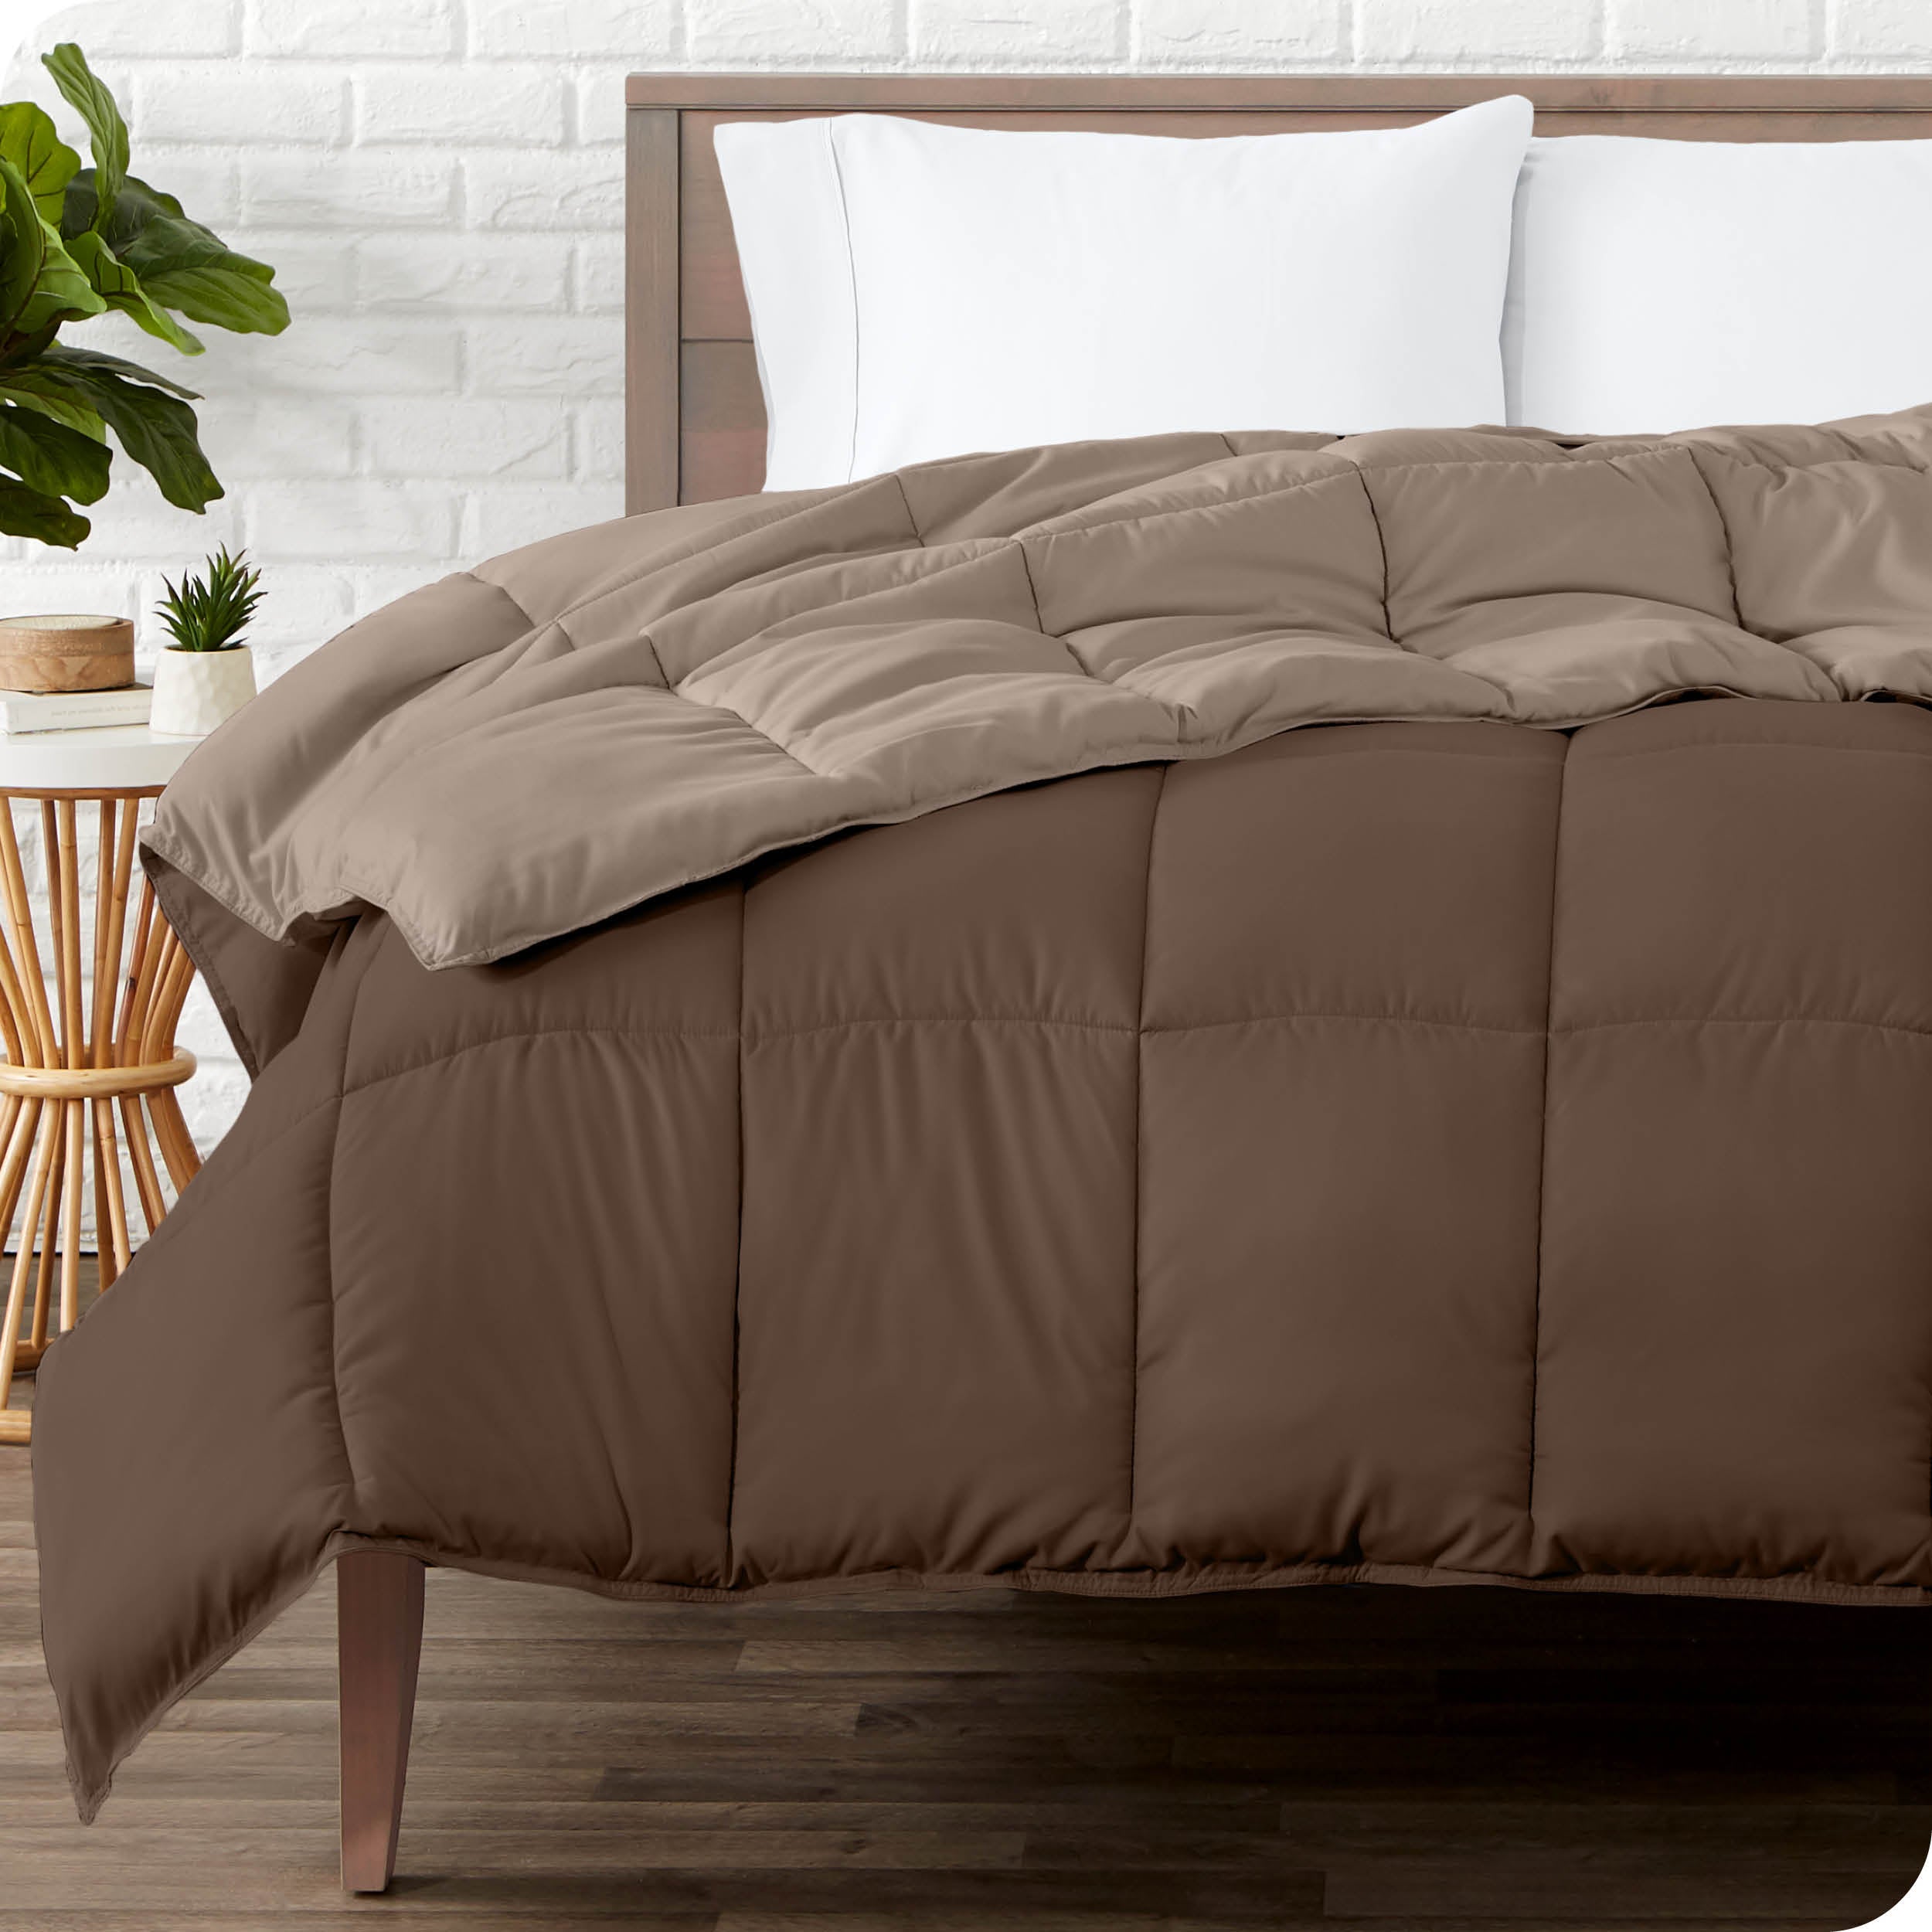 Wooden bed frame with a reversible comforter on the mattress. The comforter is folded back showing the two different colored sides.